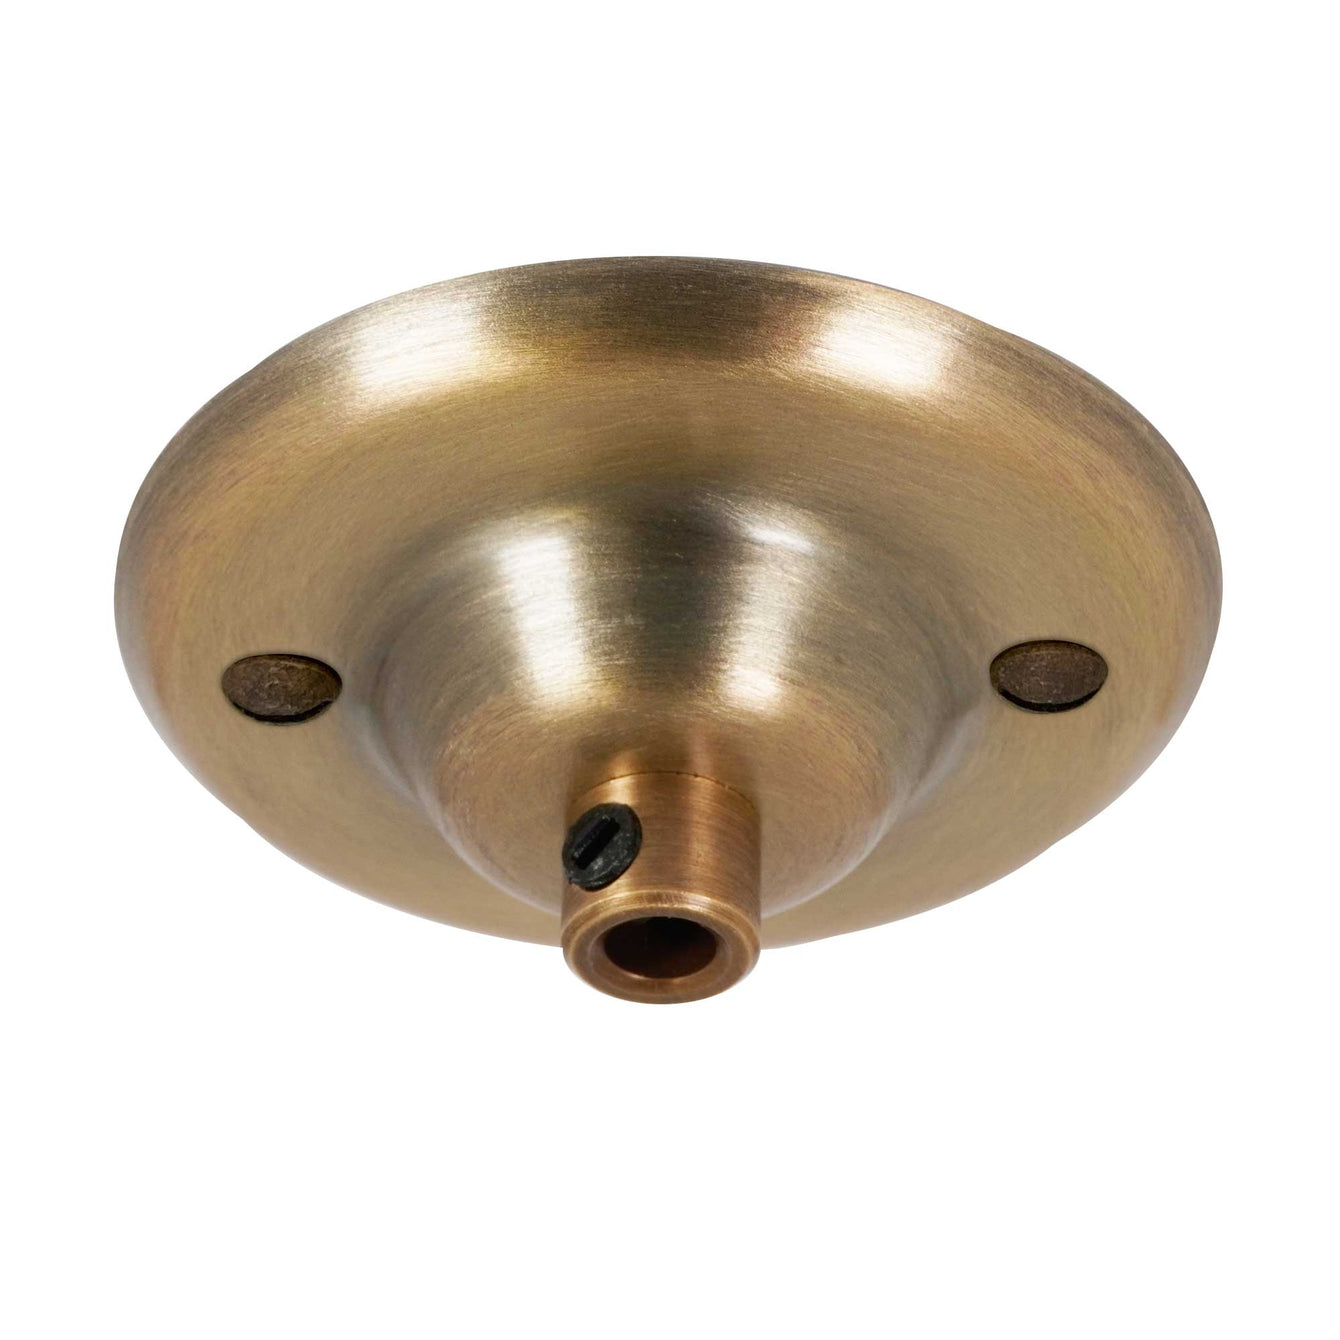 ElekTek 75mm Diameter Ceiling Plate with Cord Grip Metallic Finishes Powder Coated Colours Dawn Blue